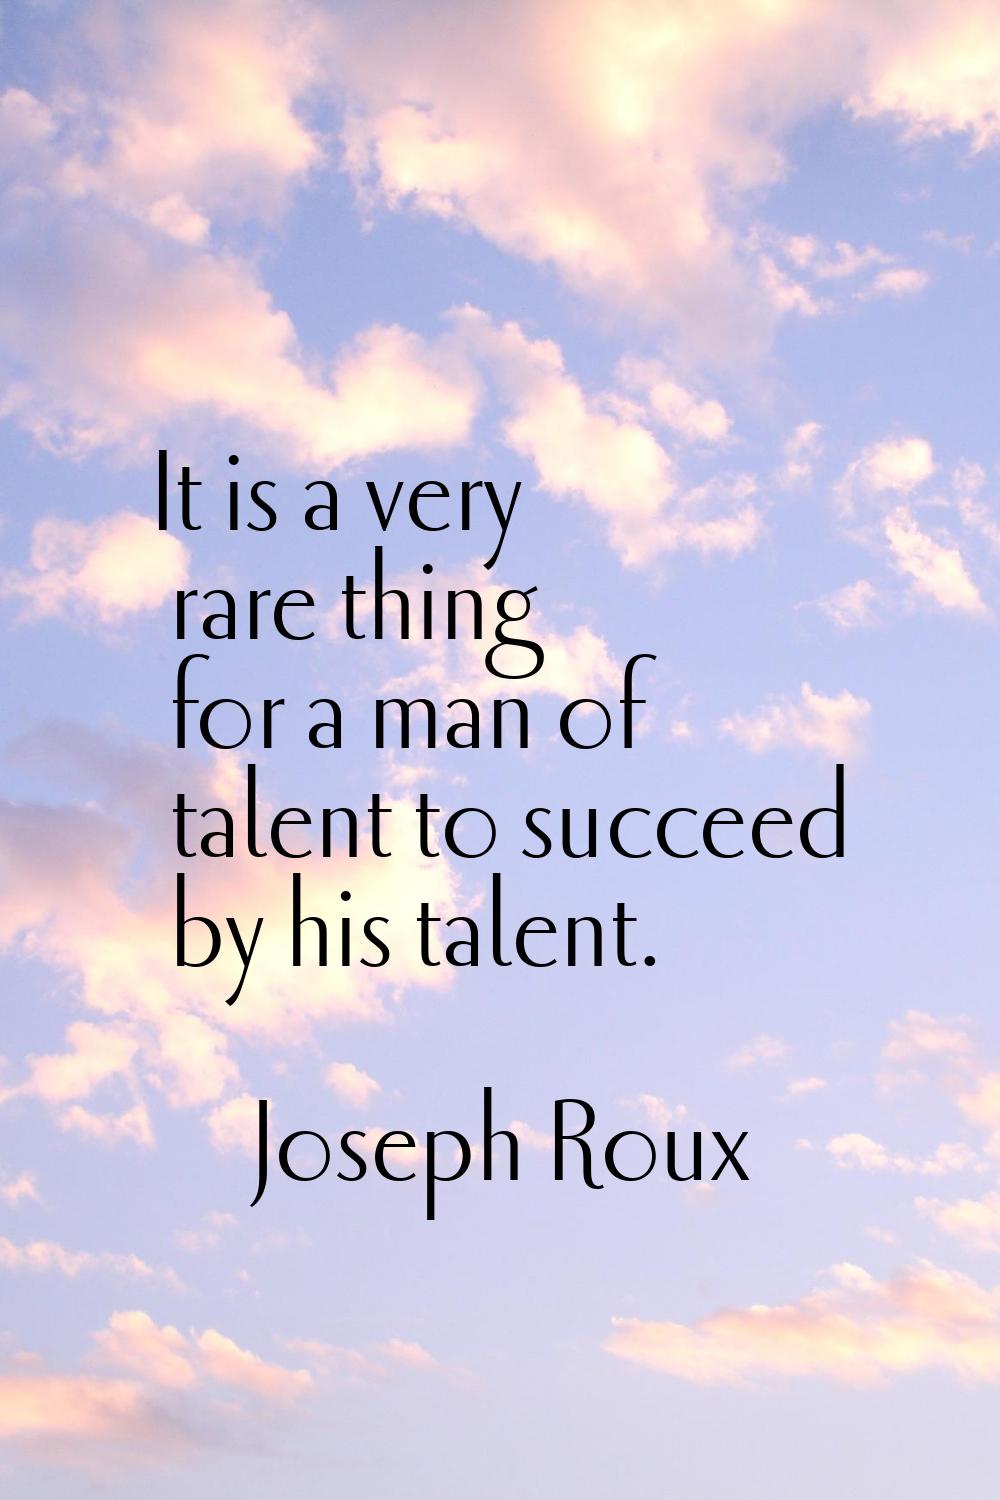 It is a very rare thing for a man of talent to succeed by his talent.